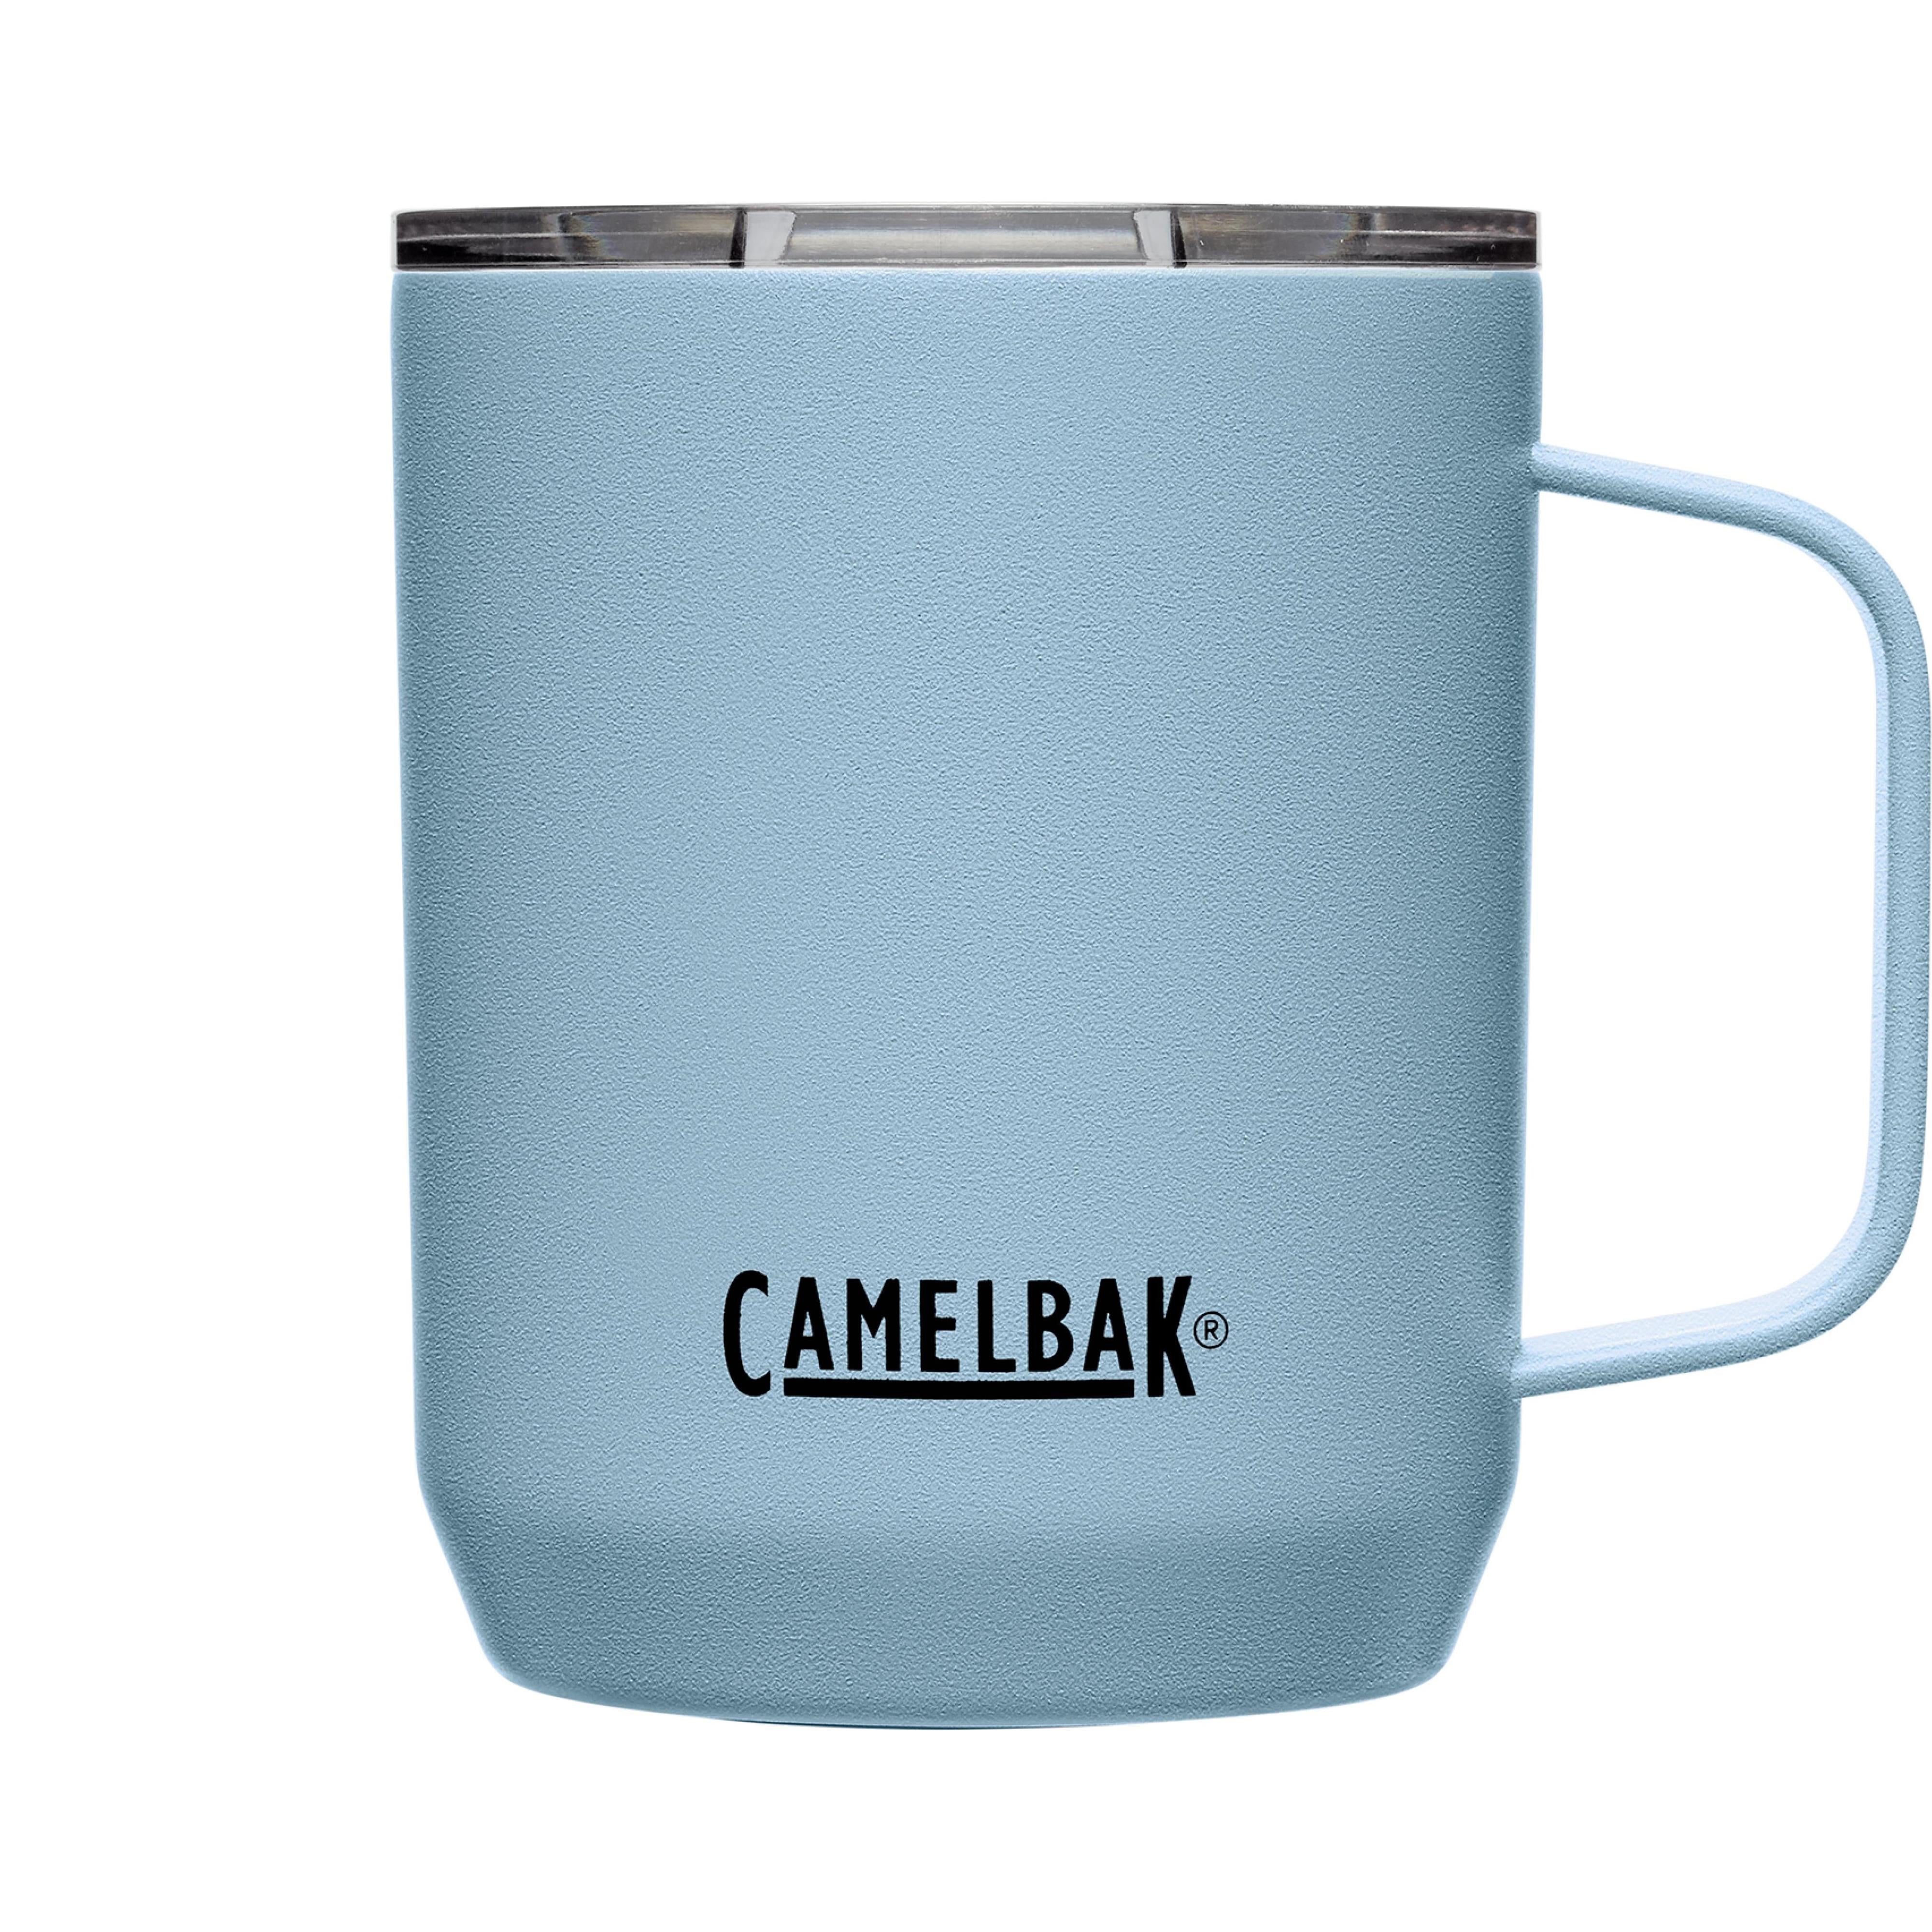 Camping Tasse Camping Vacances OUTDOOR-GESCHIRR 750ml Couverts